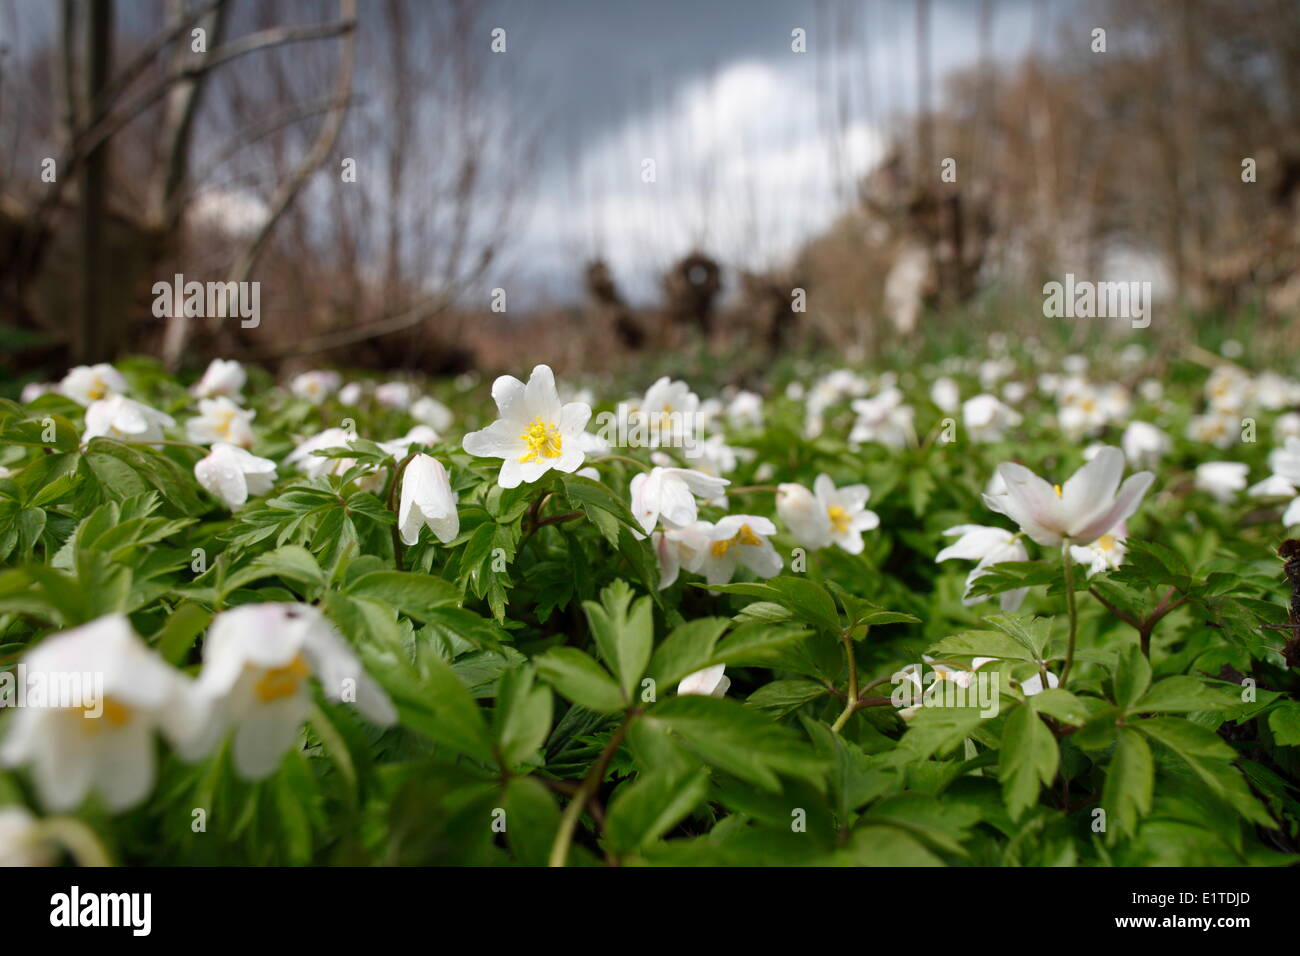 Flowering Wood Anemone in Kolland, Utrecht, The Netherlands. Kolland is a small Natura 2000 area consisting of cut Ash truncs. Stock Photo